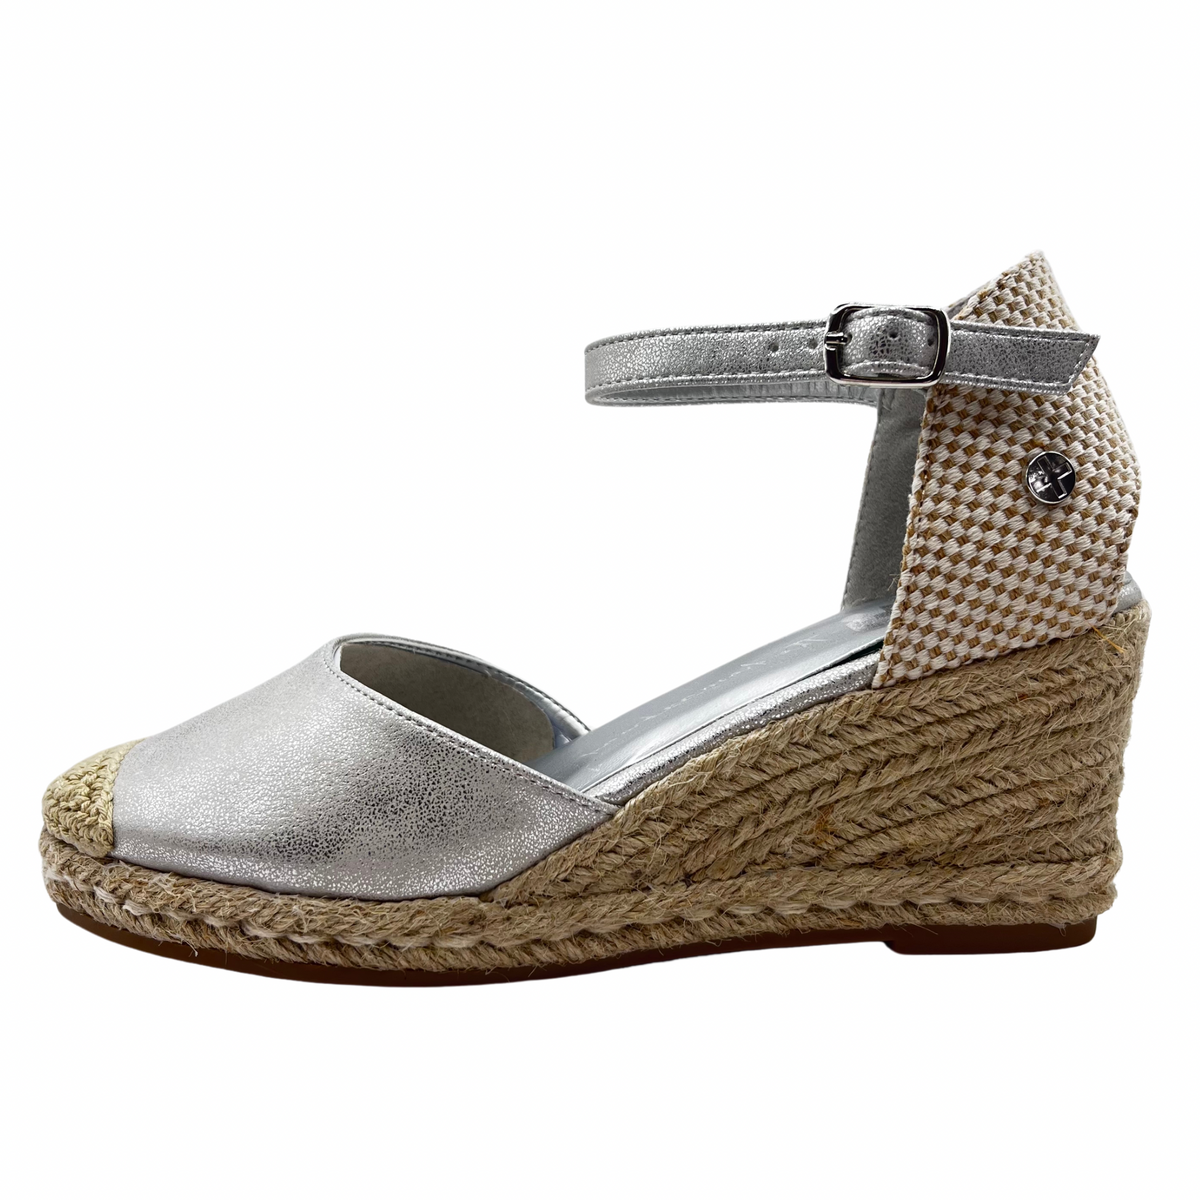 Xti Silver and Woven Wedge Closed Toe Sandals